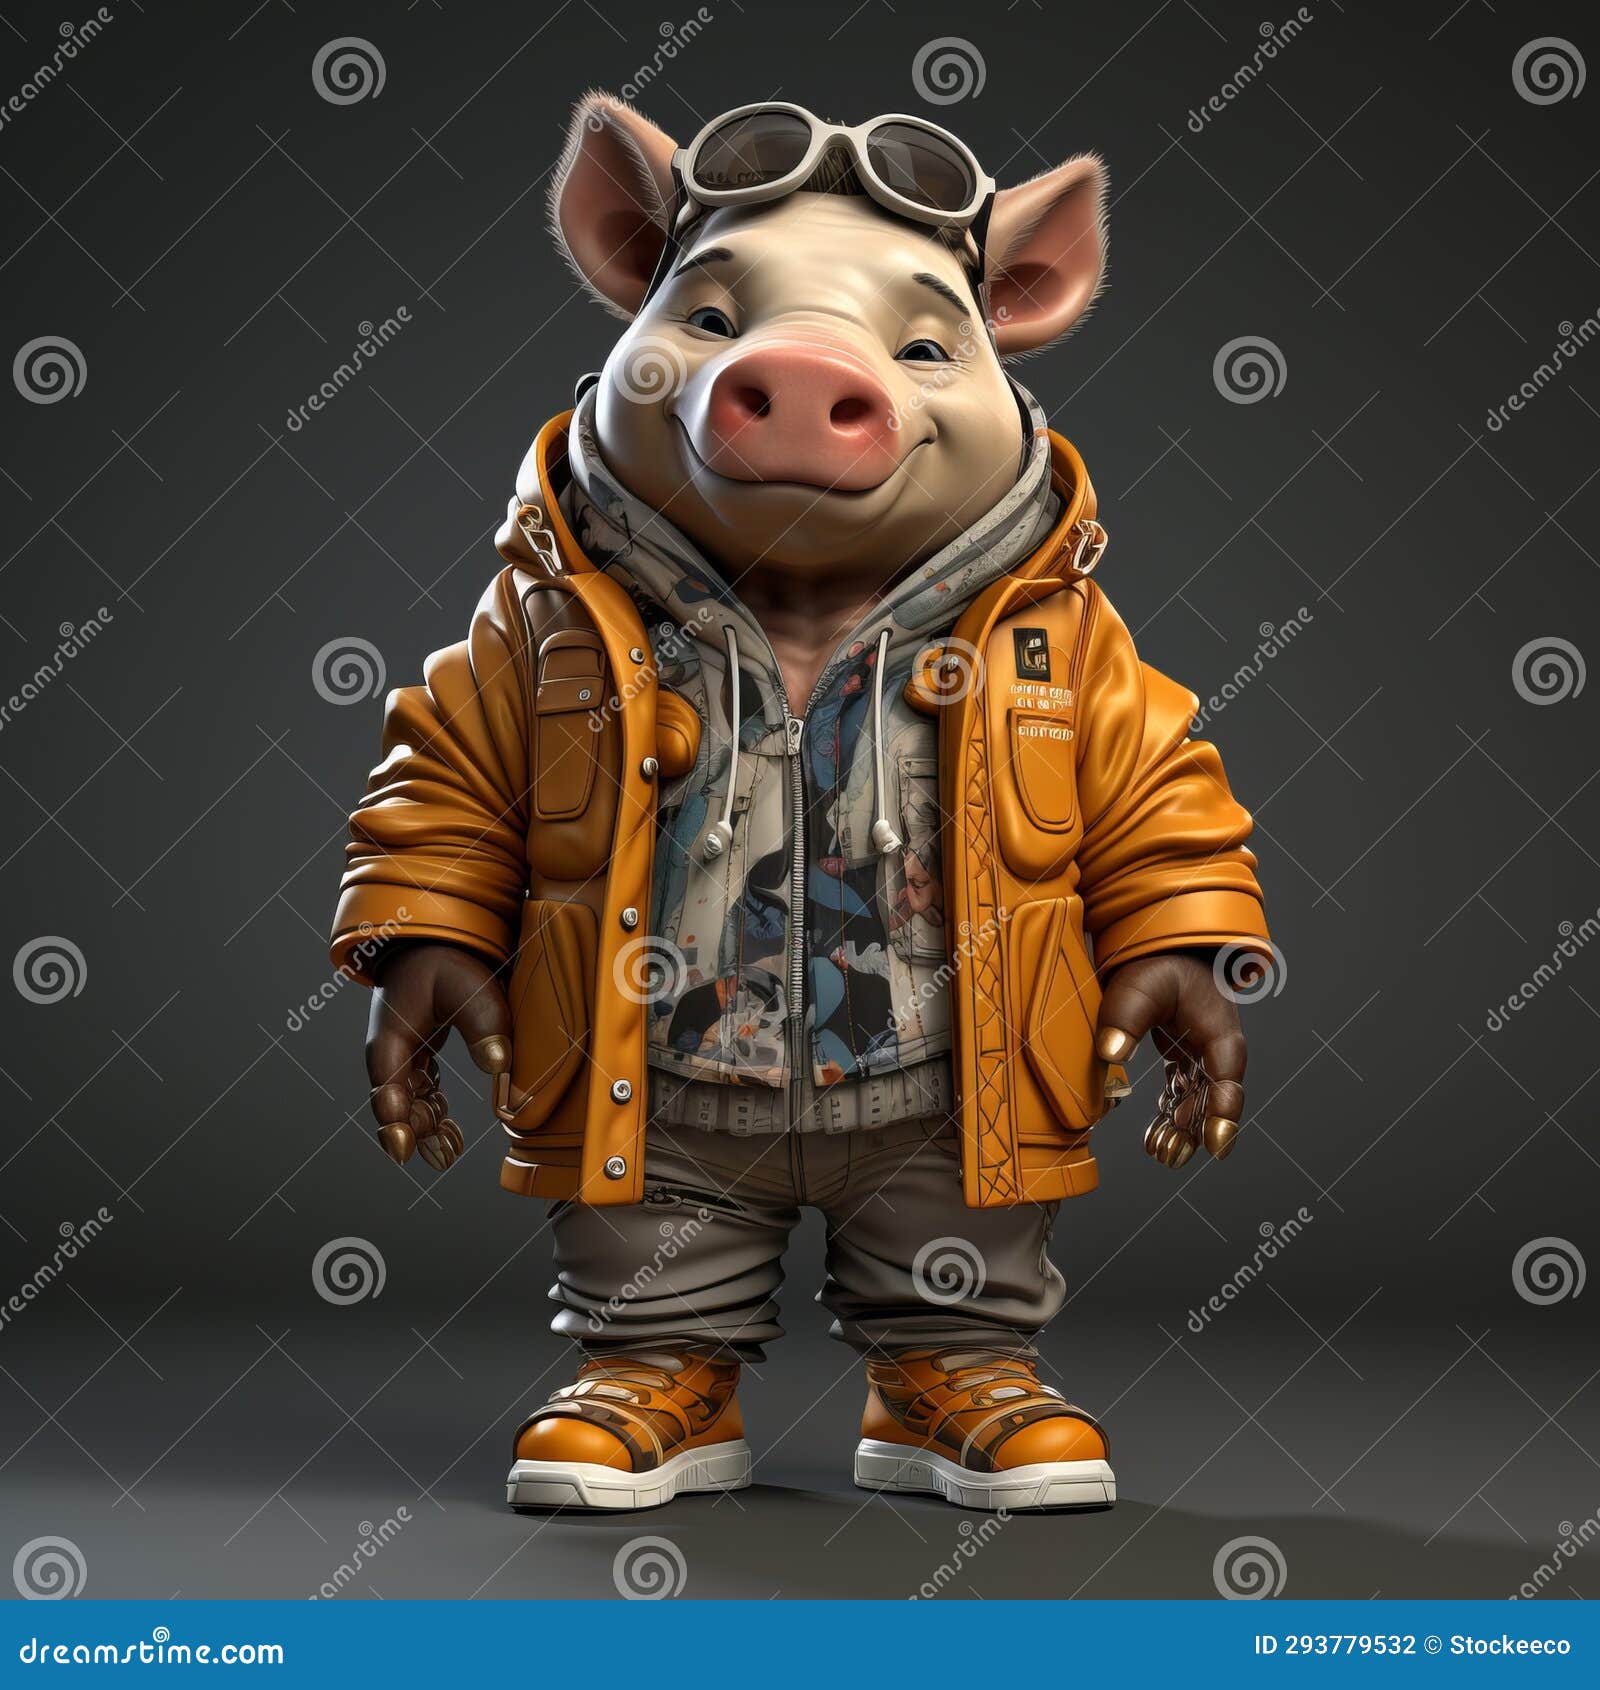 urban street style 3d pig character with glasses and jacket